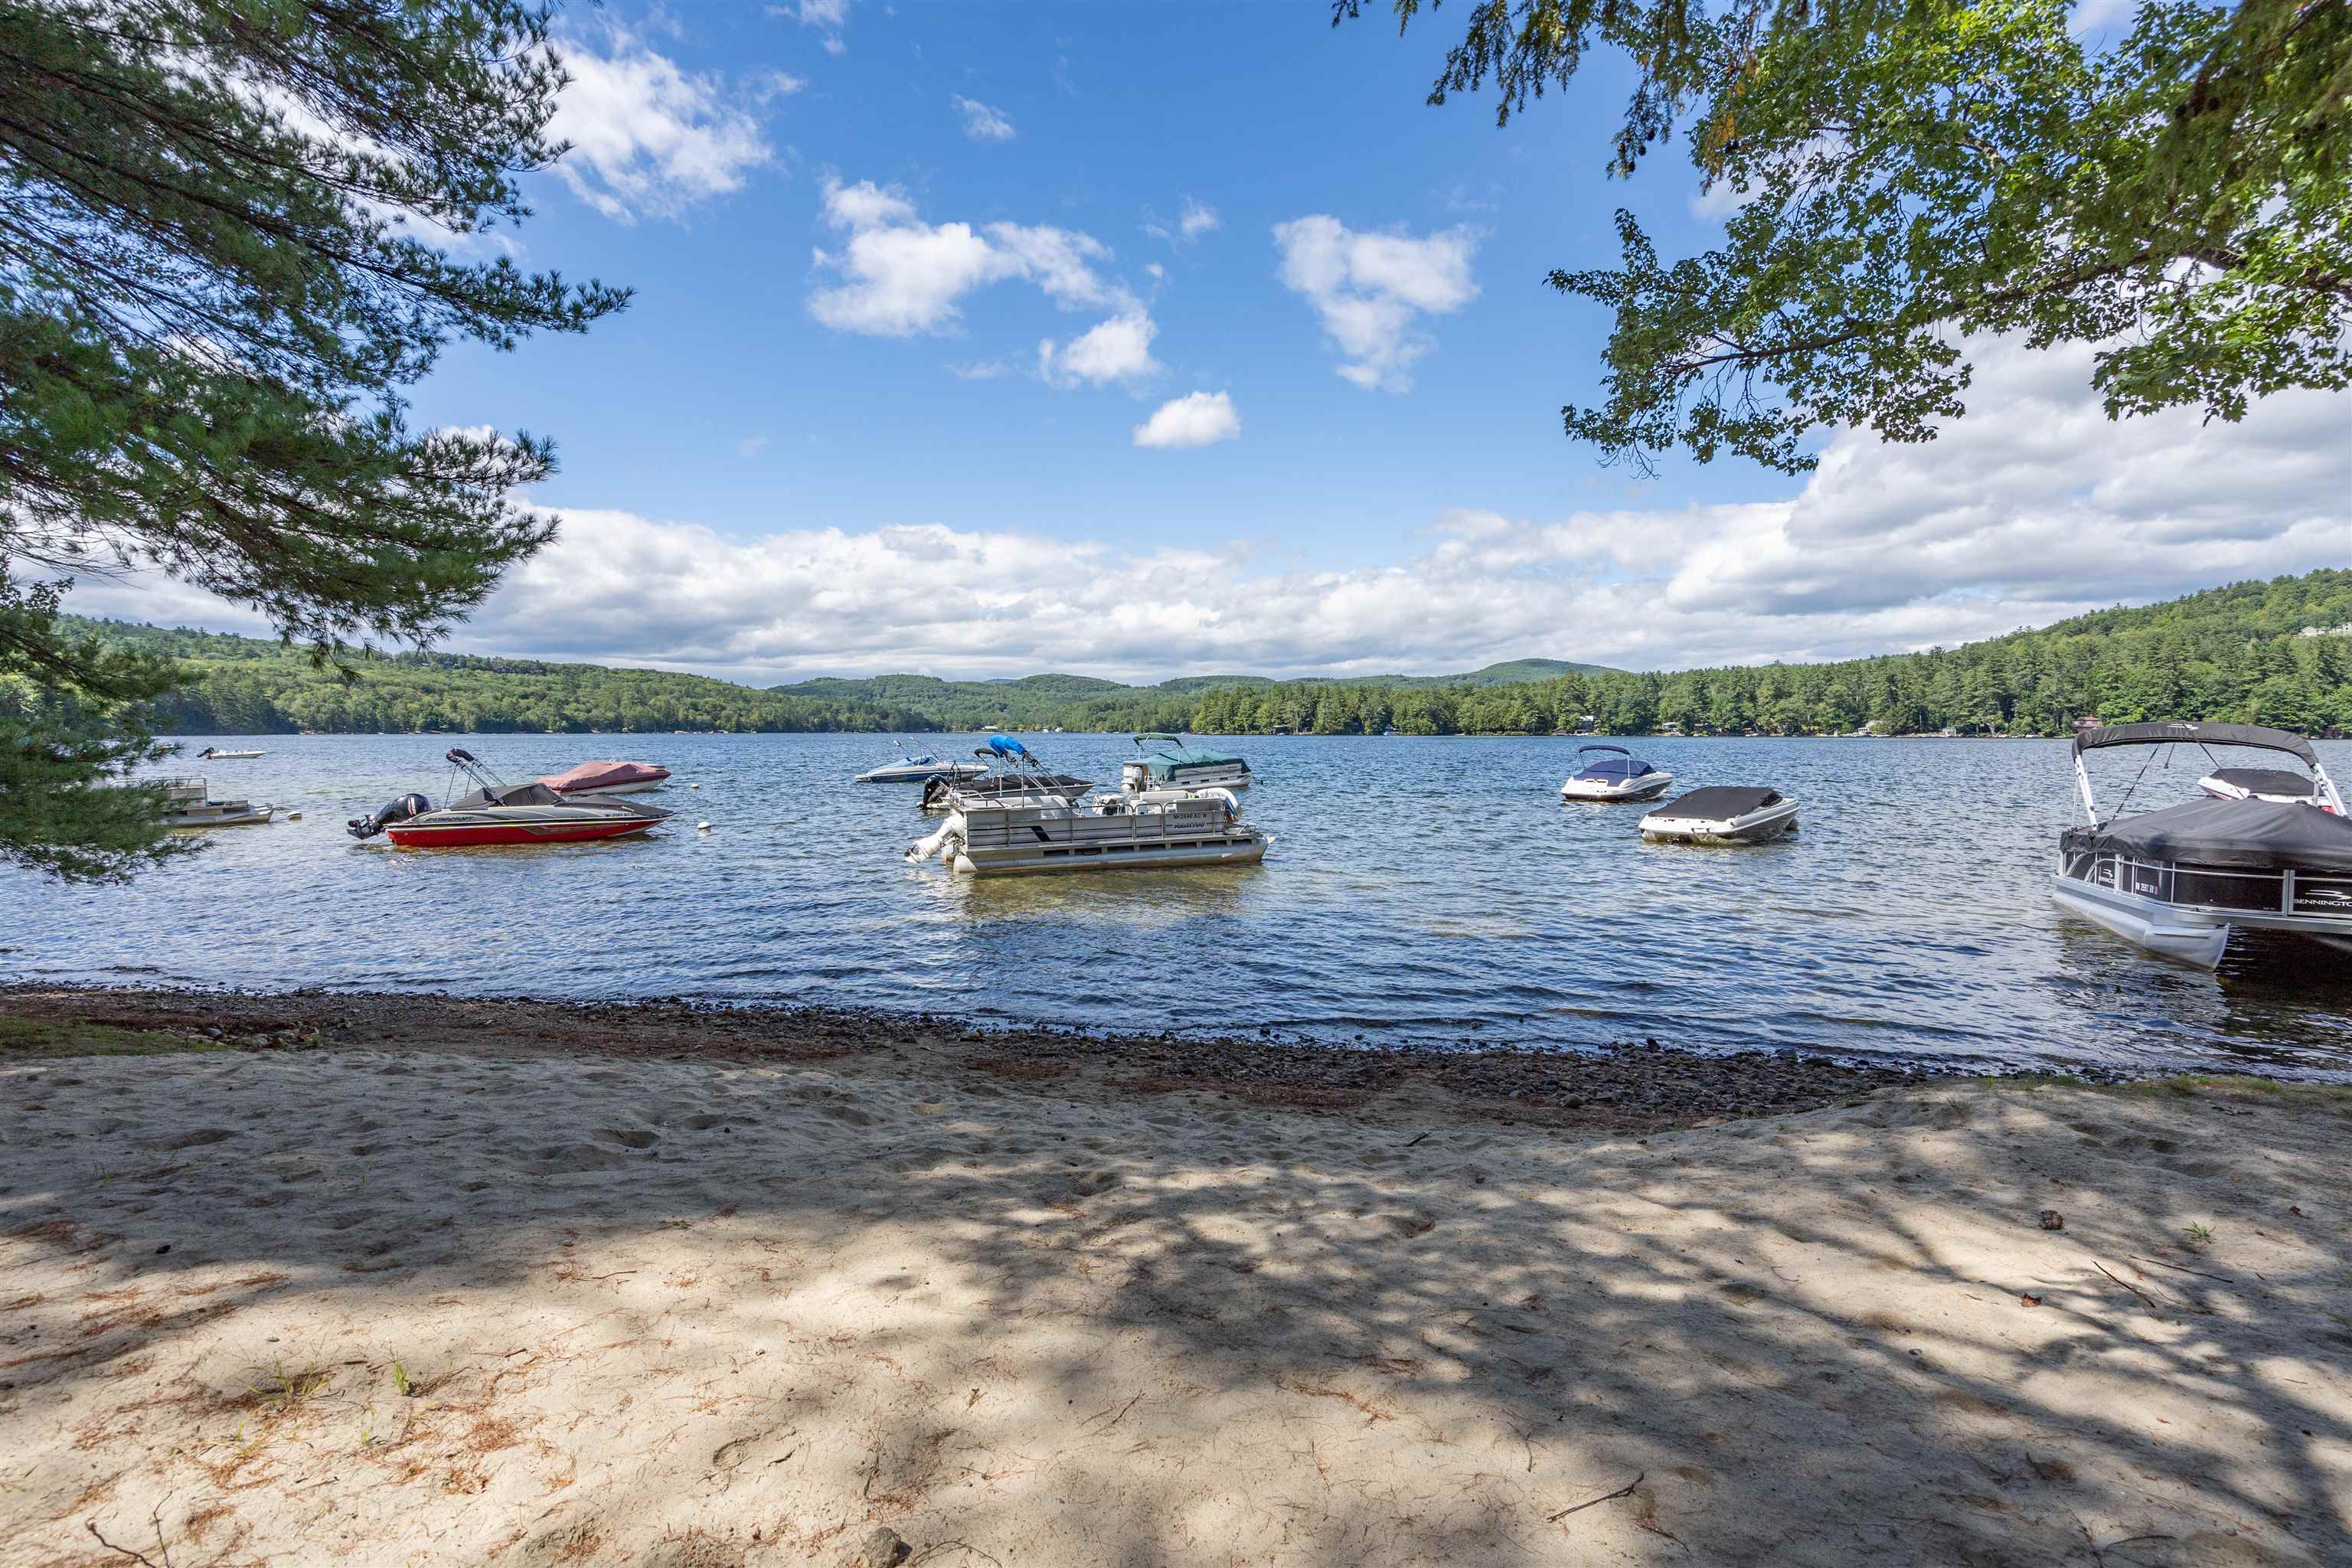 HOLDERNESS NH Homes for sale